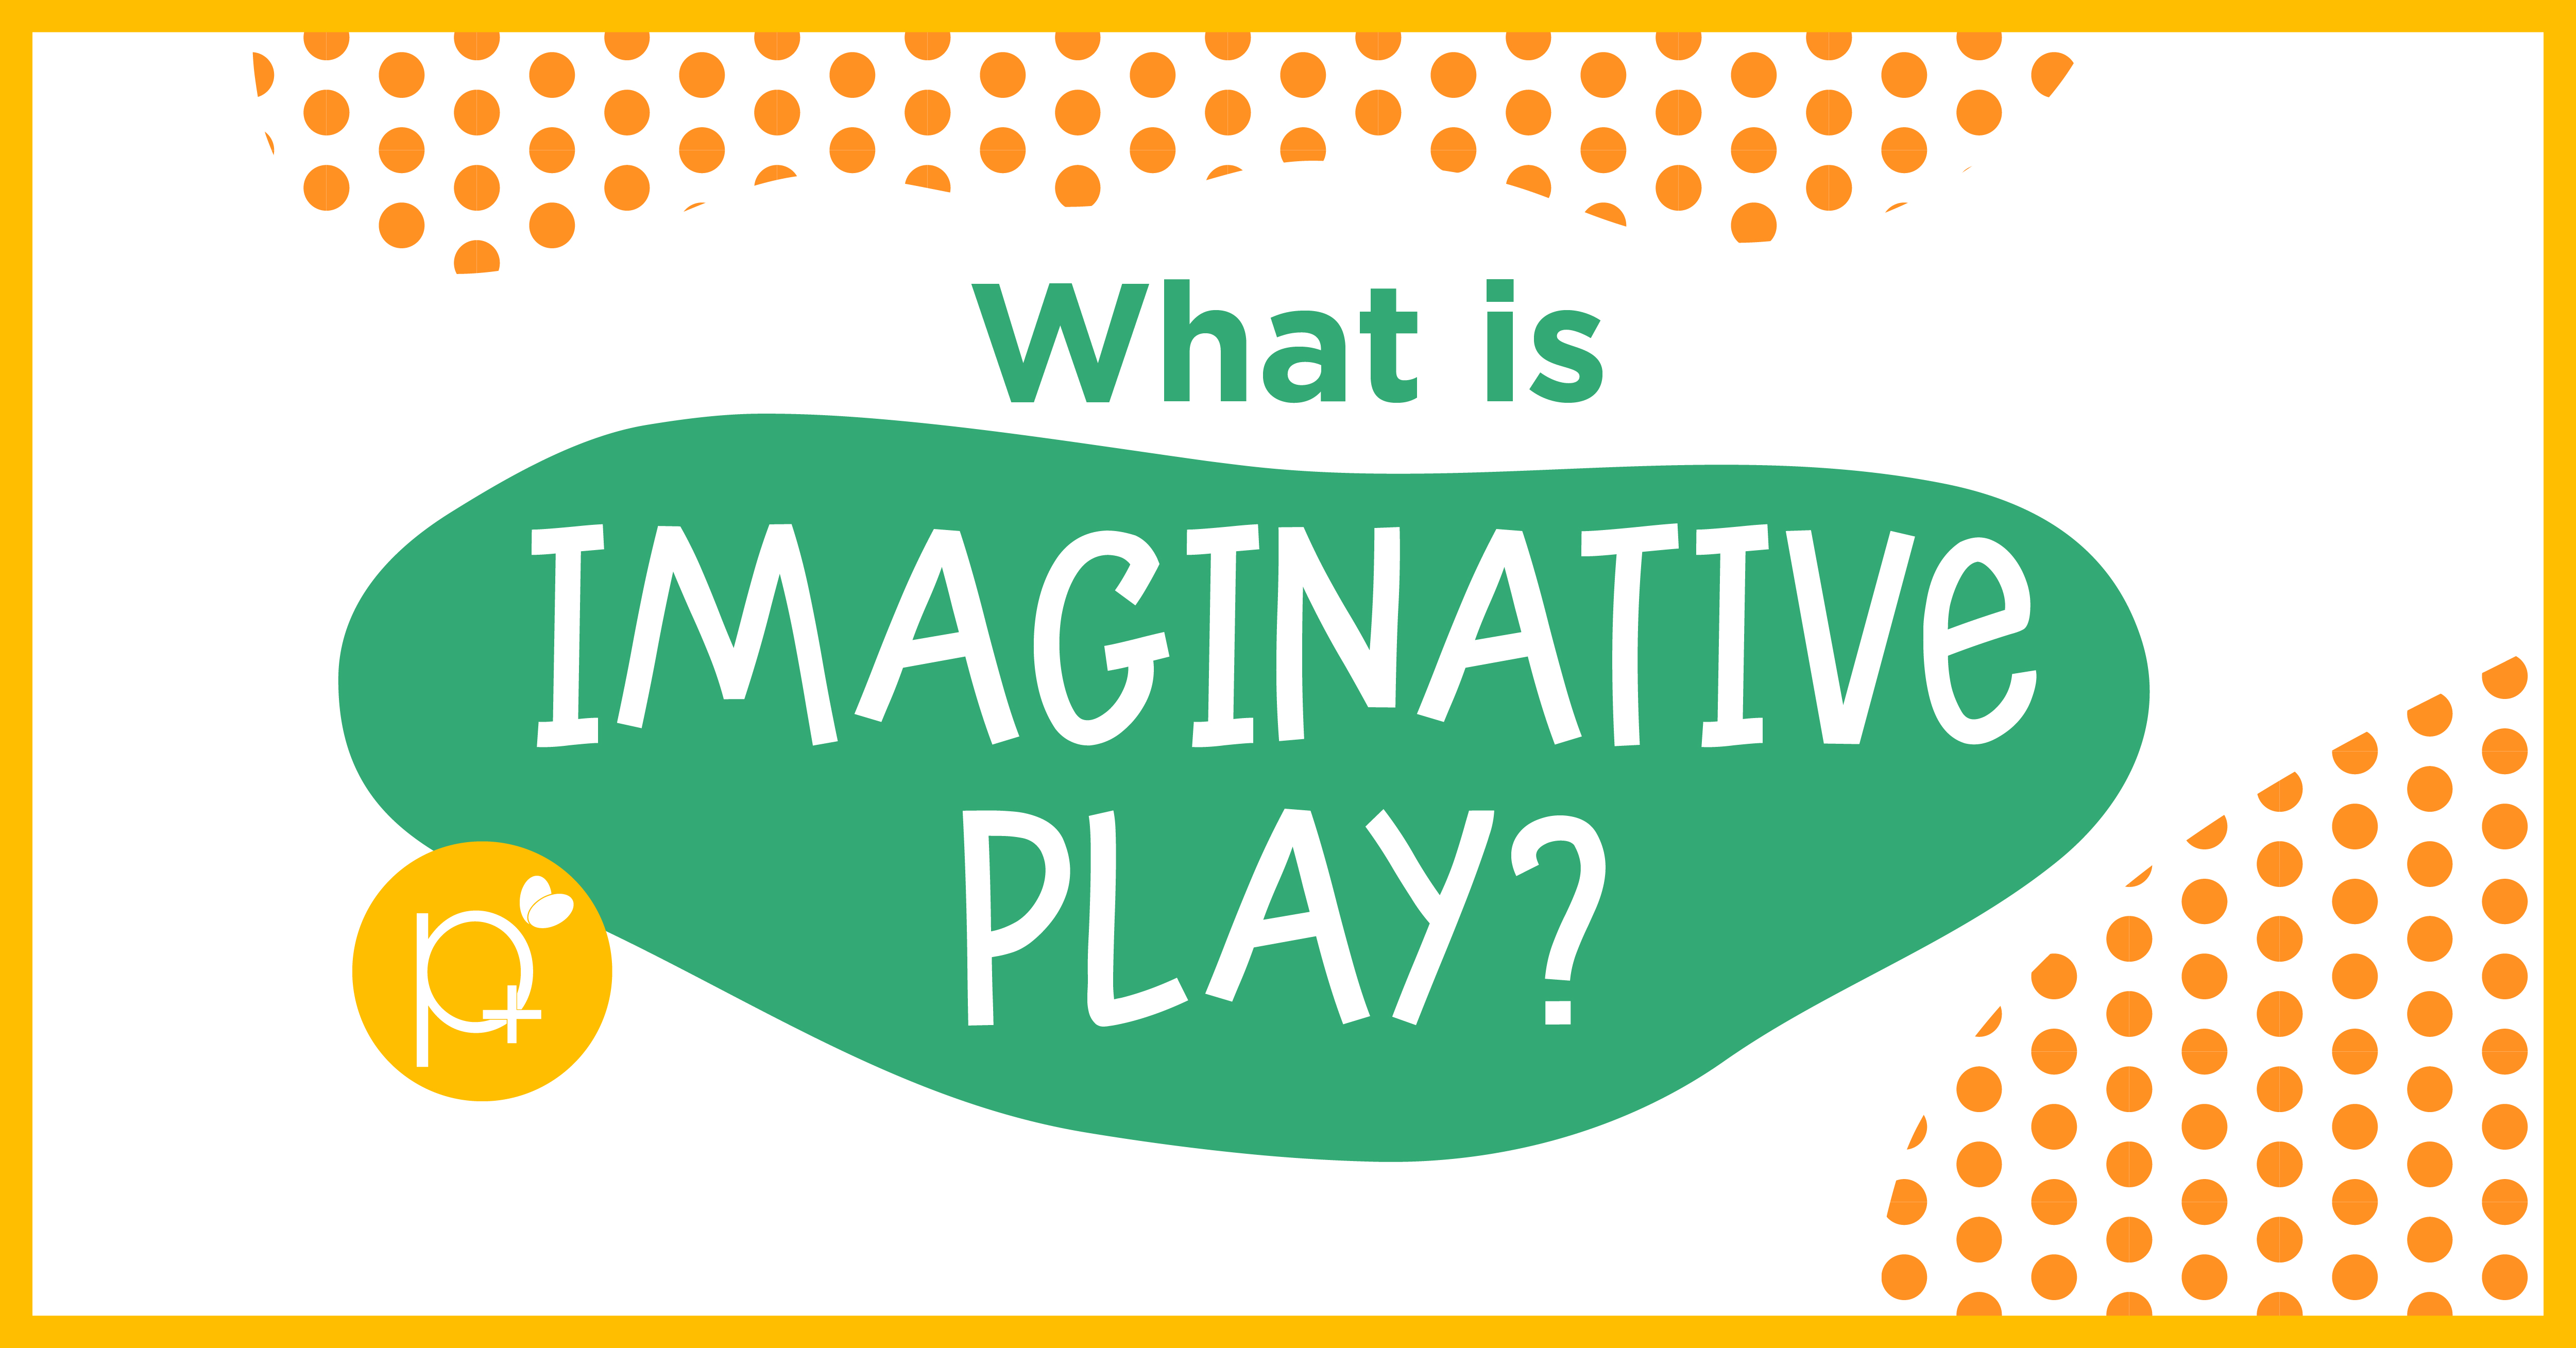 What is Imaginative Play?